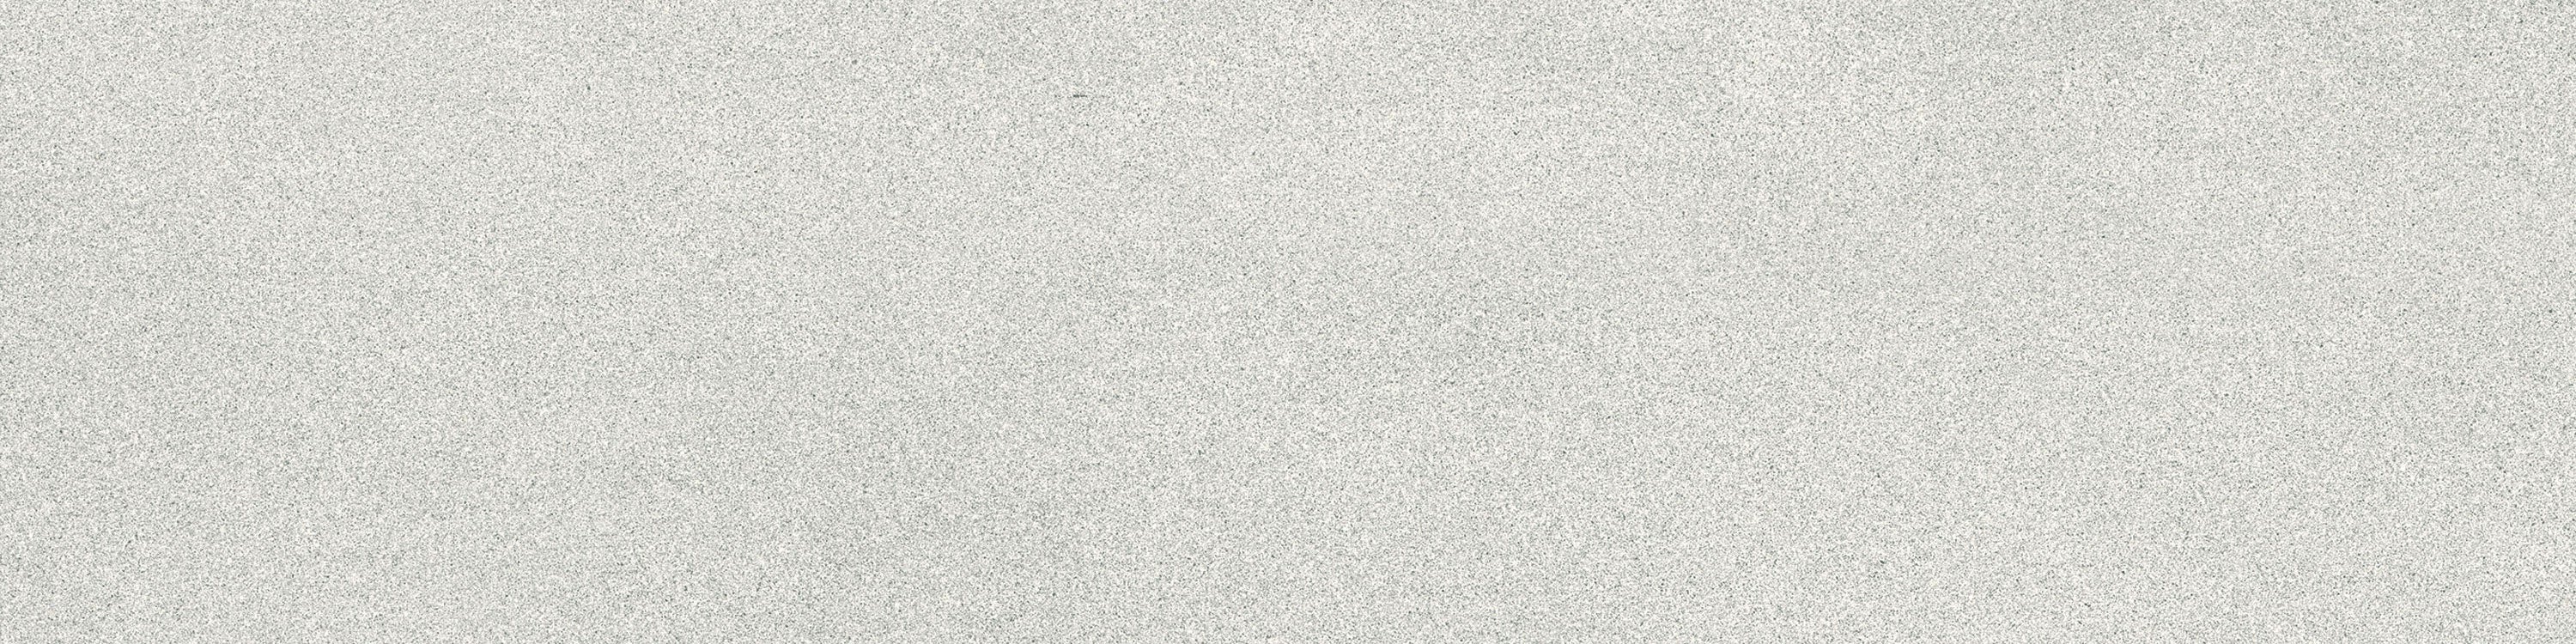 landmark frontier20 sedimentary white avenue paver tile 12x48x20mm matte rectified porcelain tile distributed by surface group international